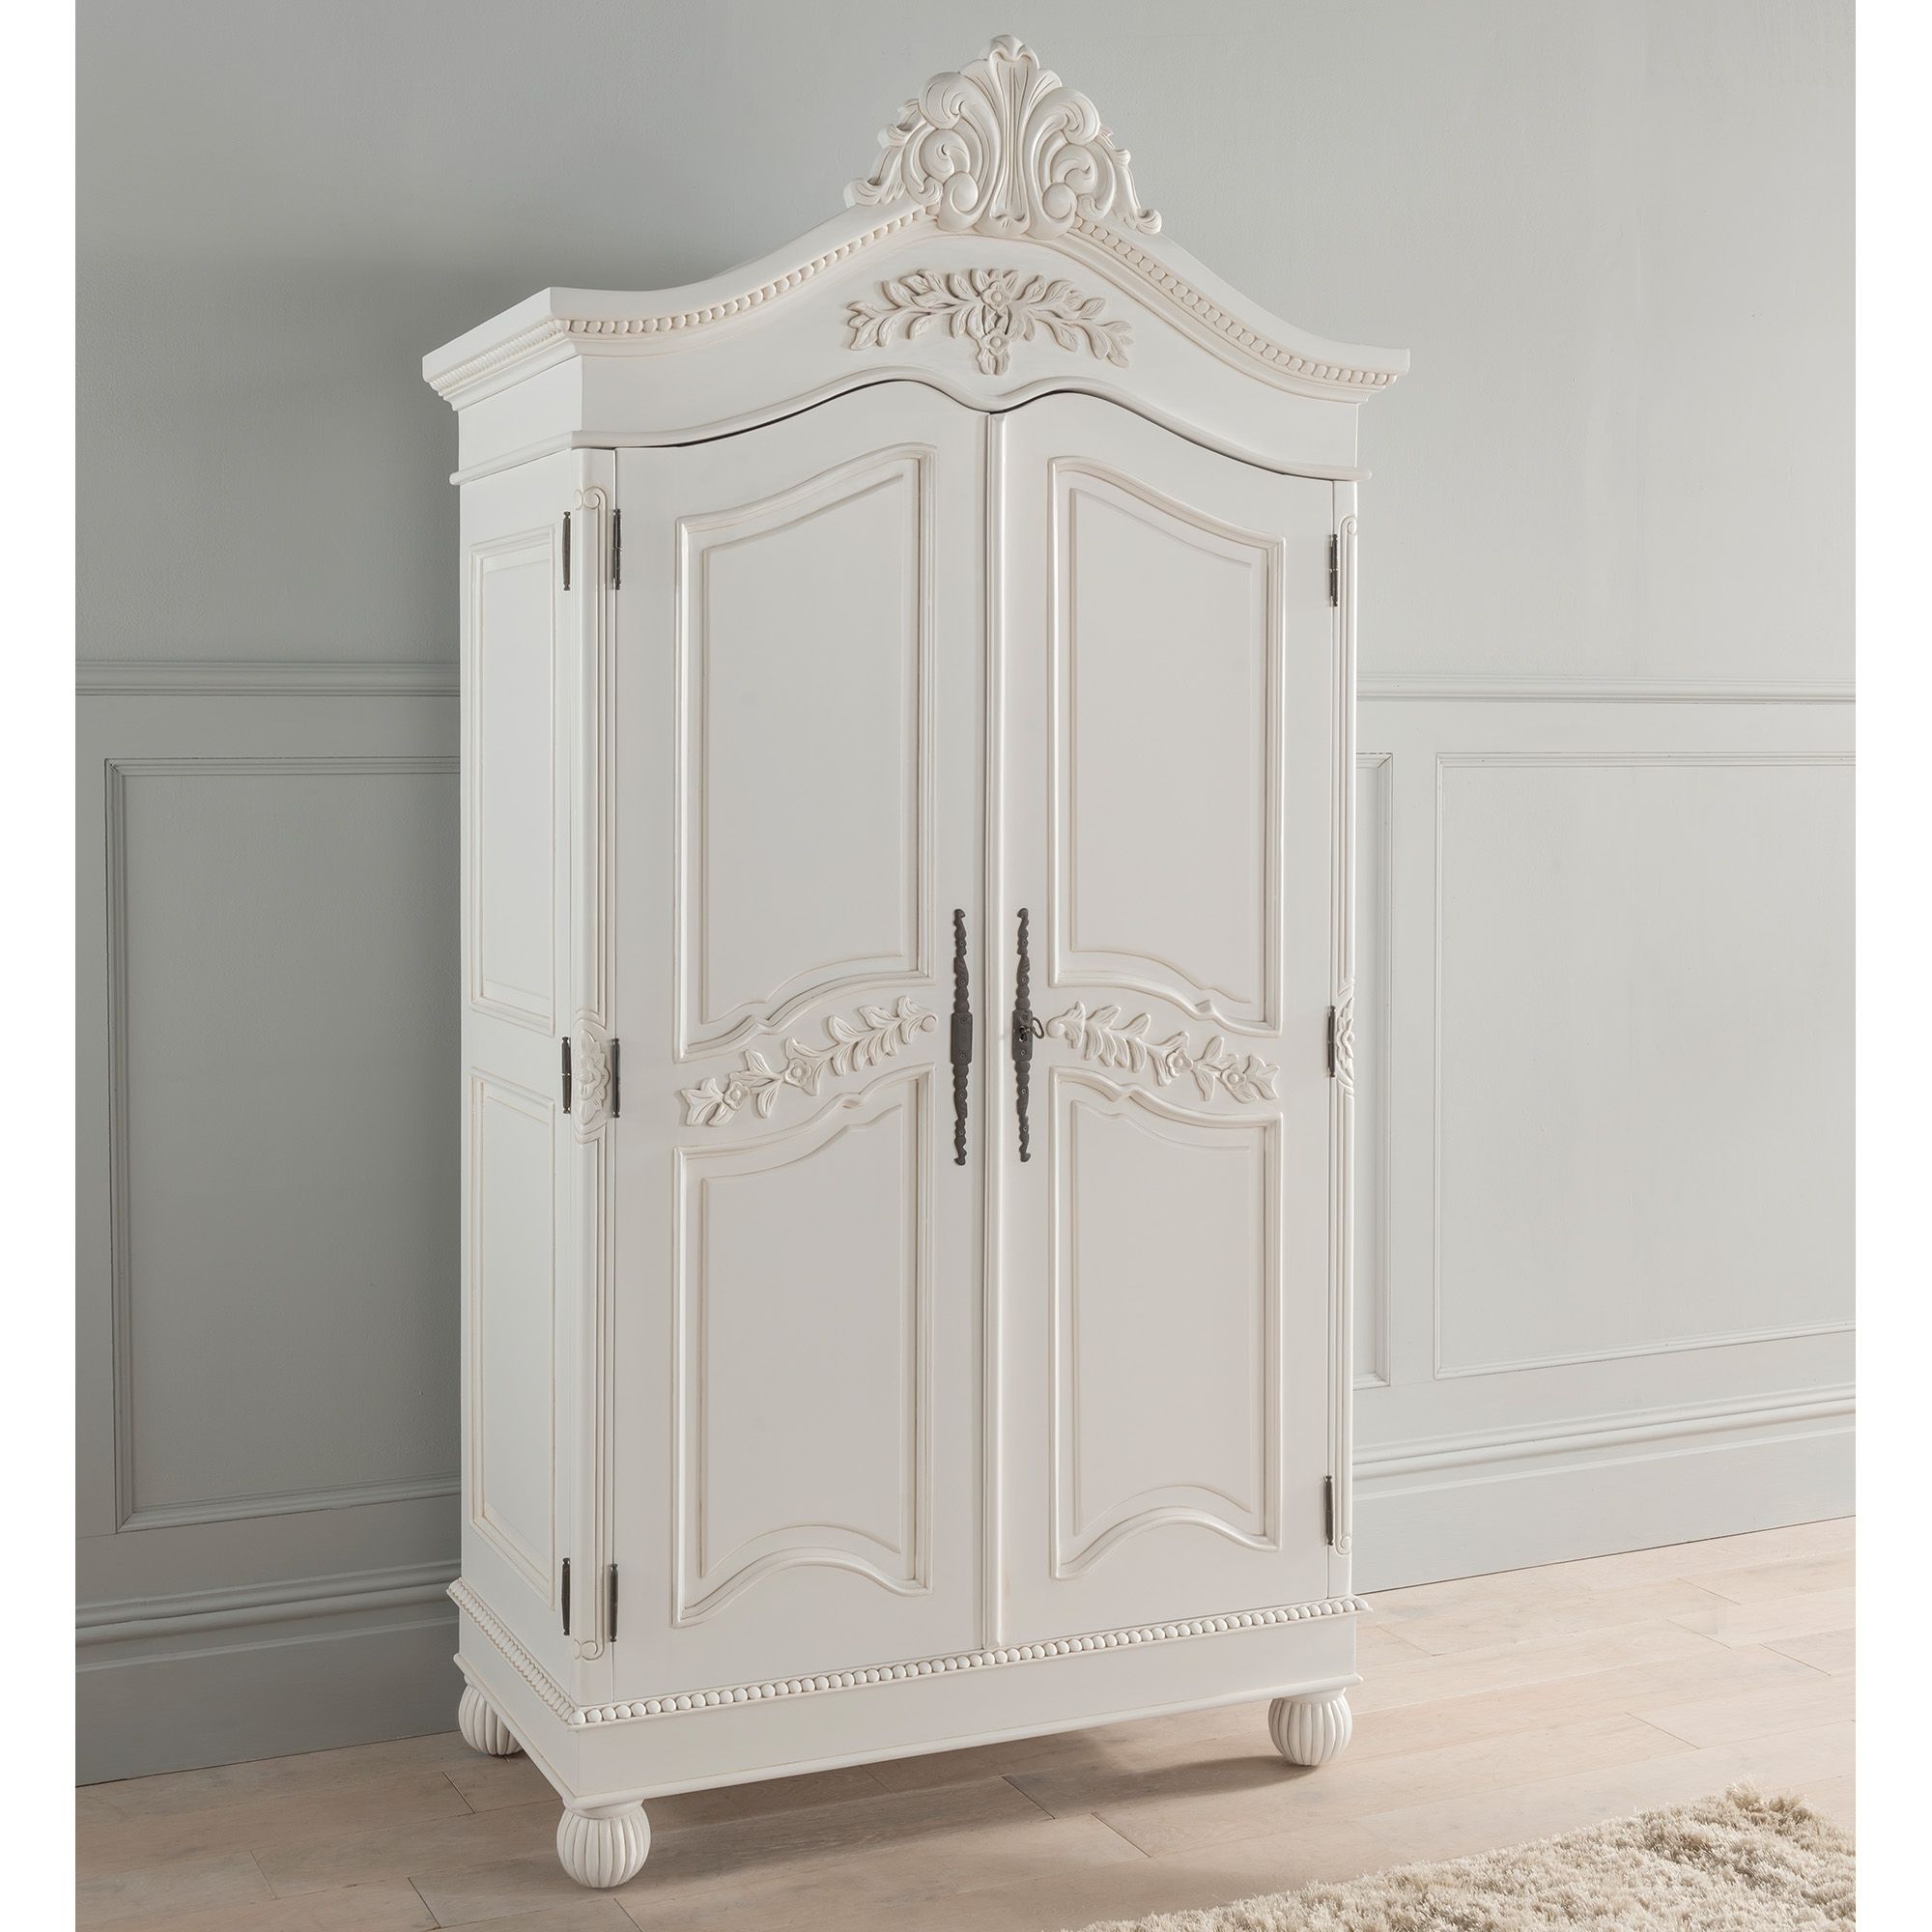 Antique French Style Wardrobe | Shabby Chic Bedroom Furniture Regarding Cream French Wardrobes (View 11 of 20)